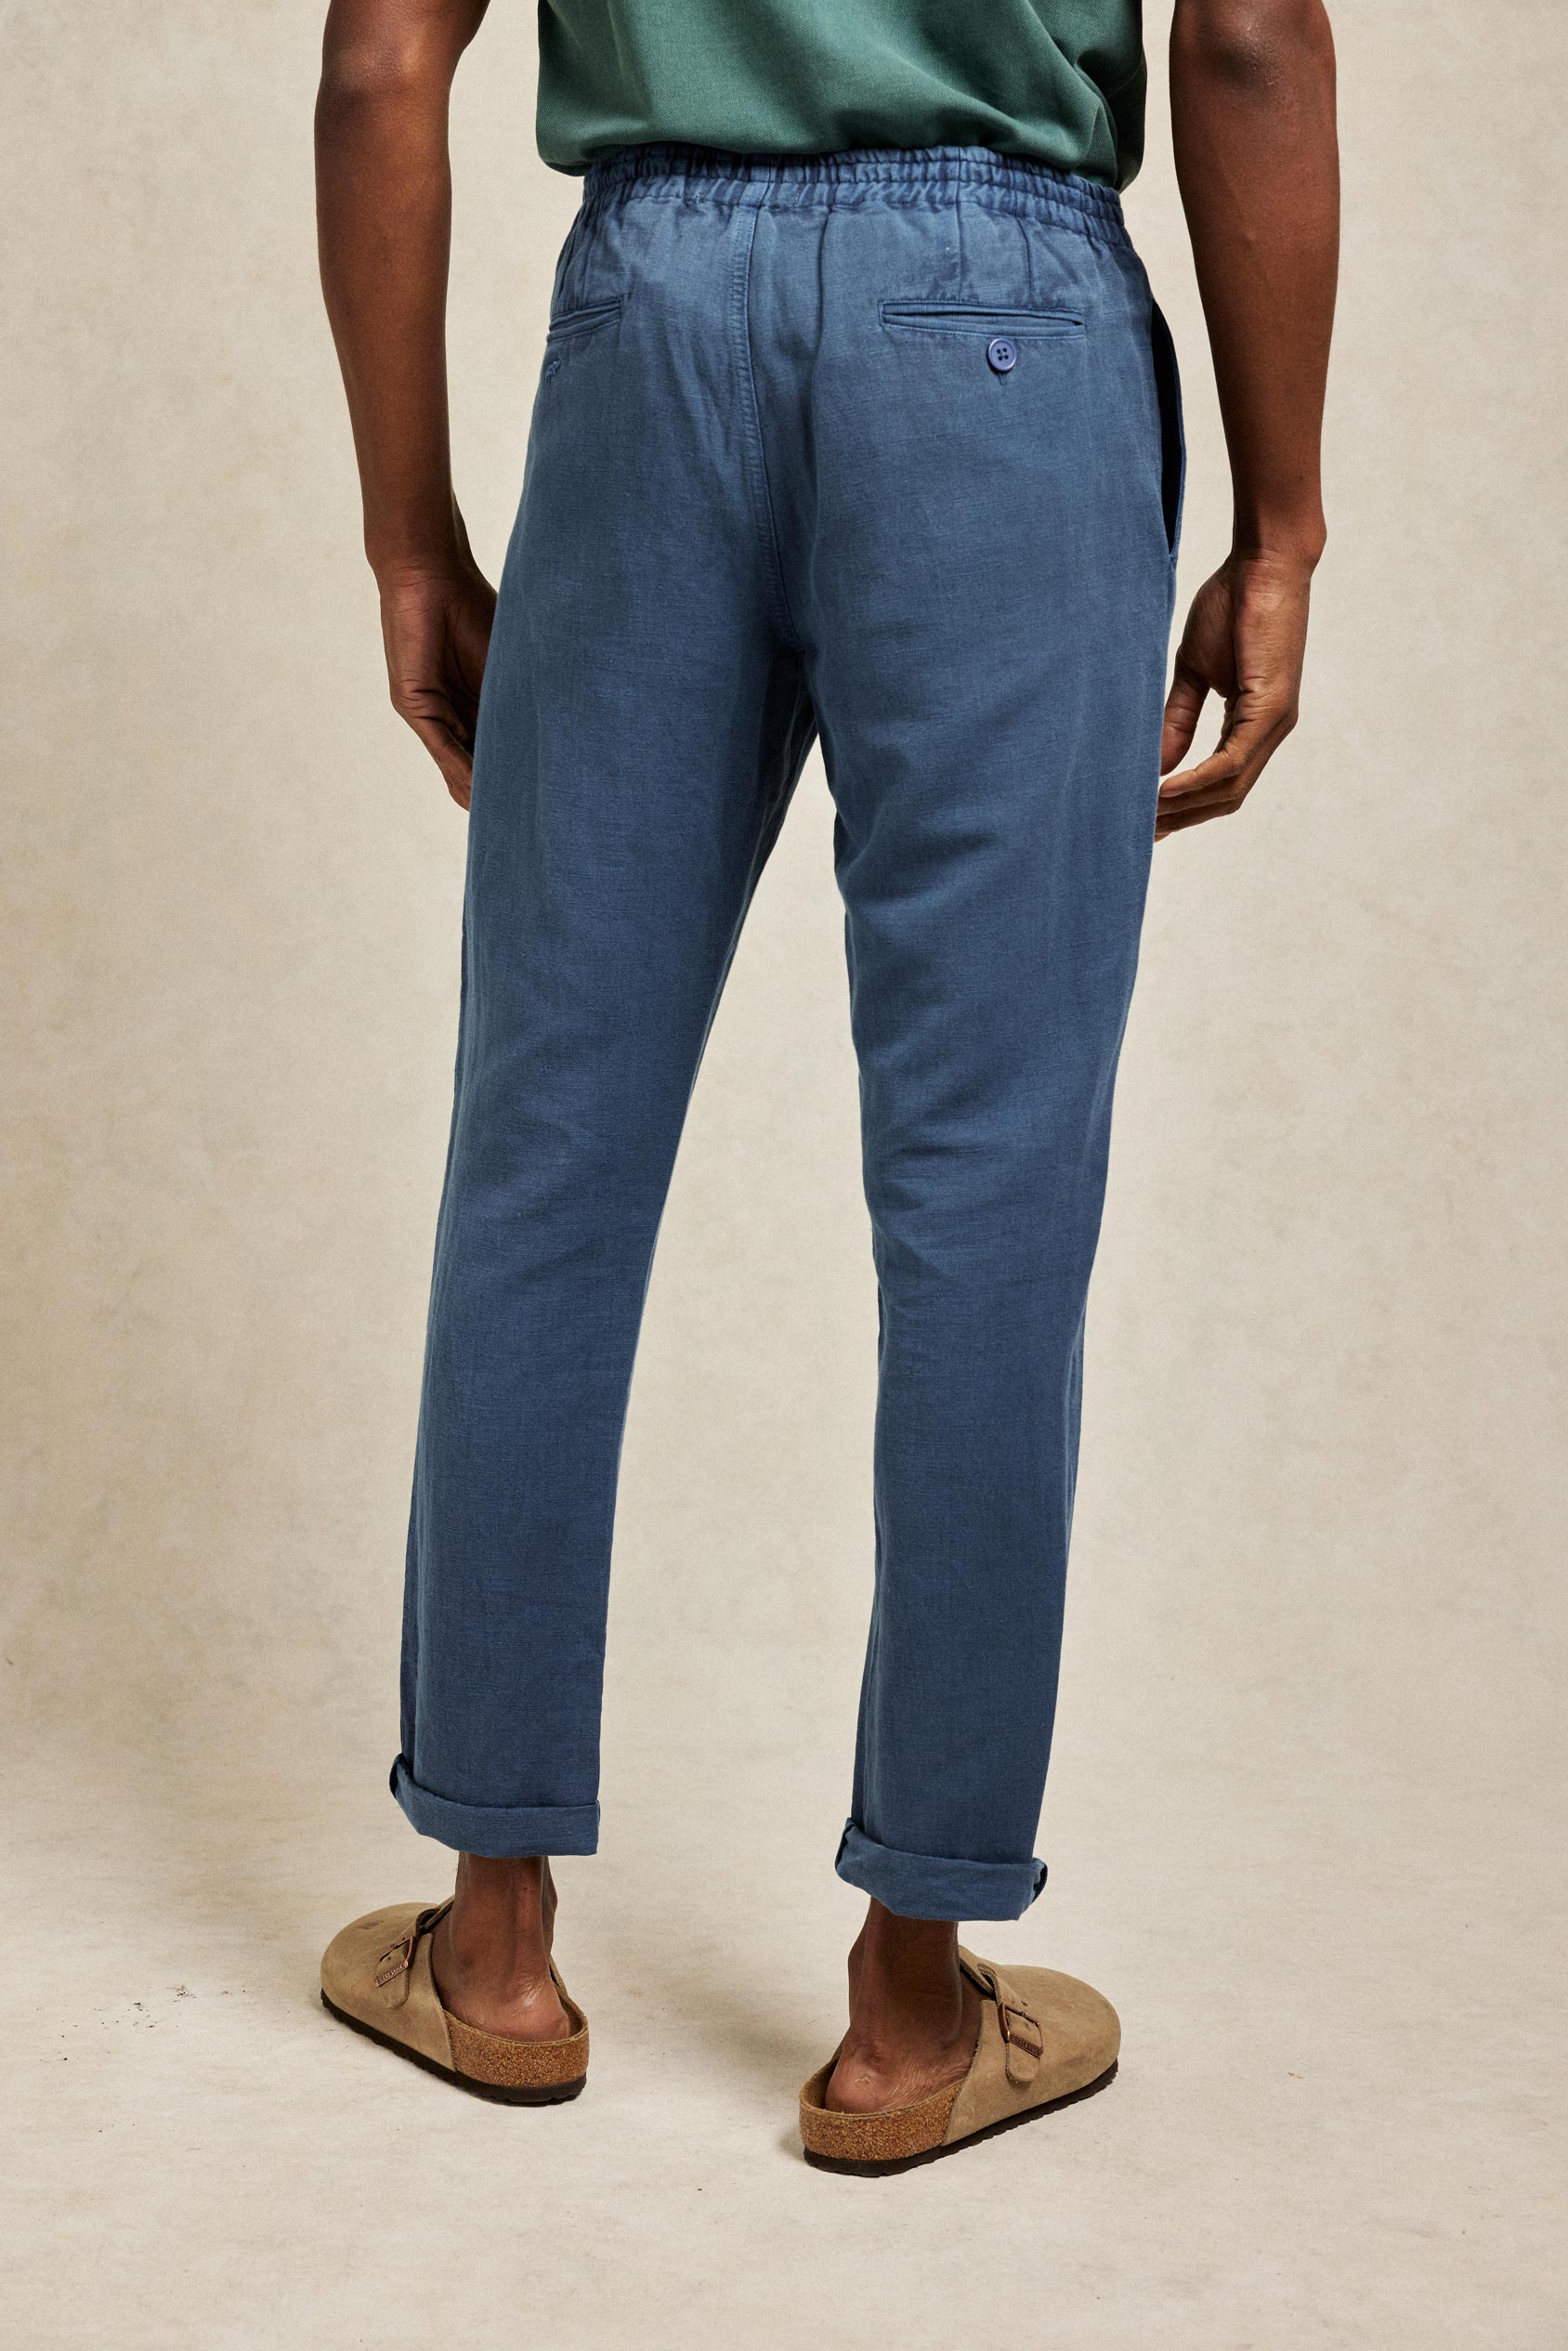 Rowan Washed Navy Linen Cotton Trousers